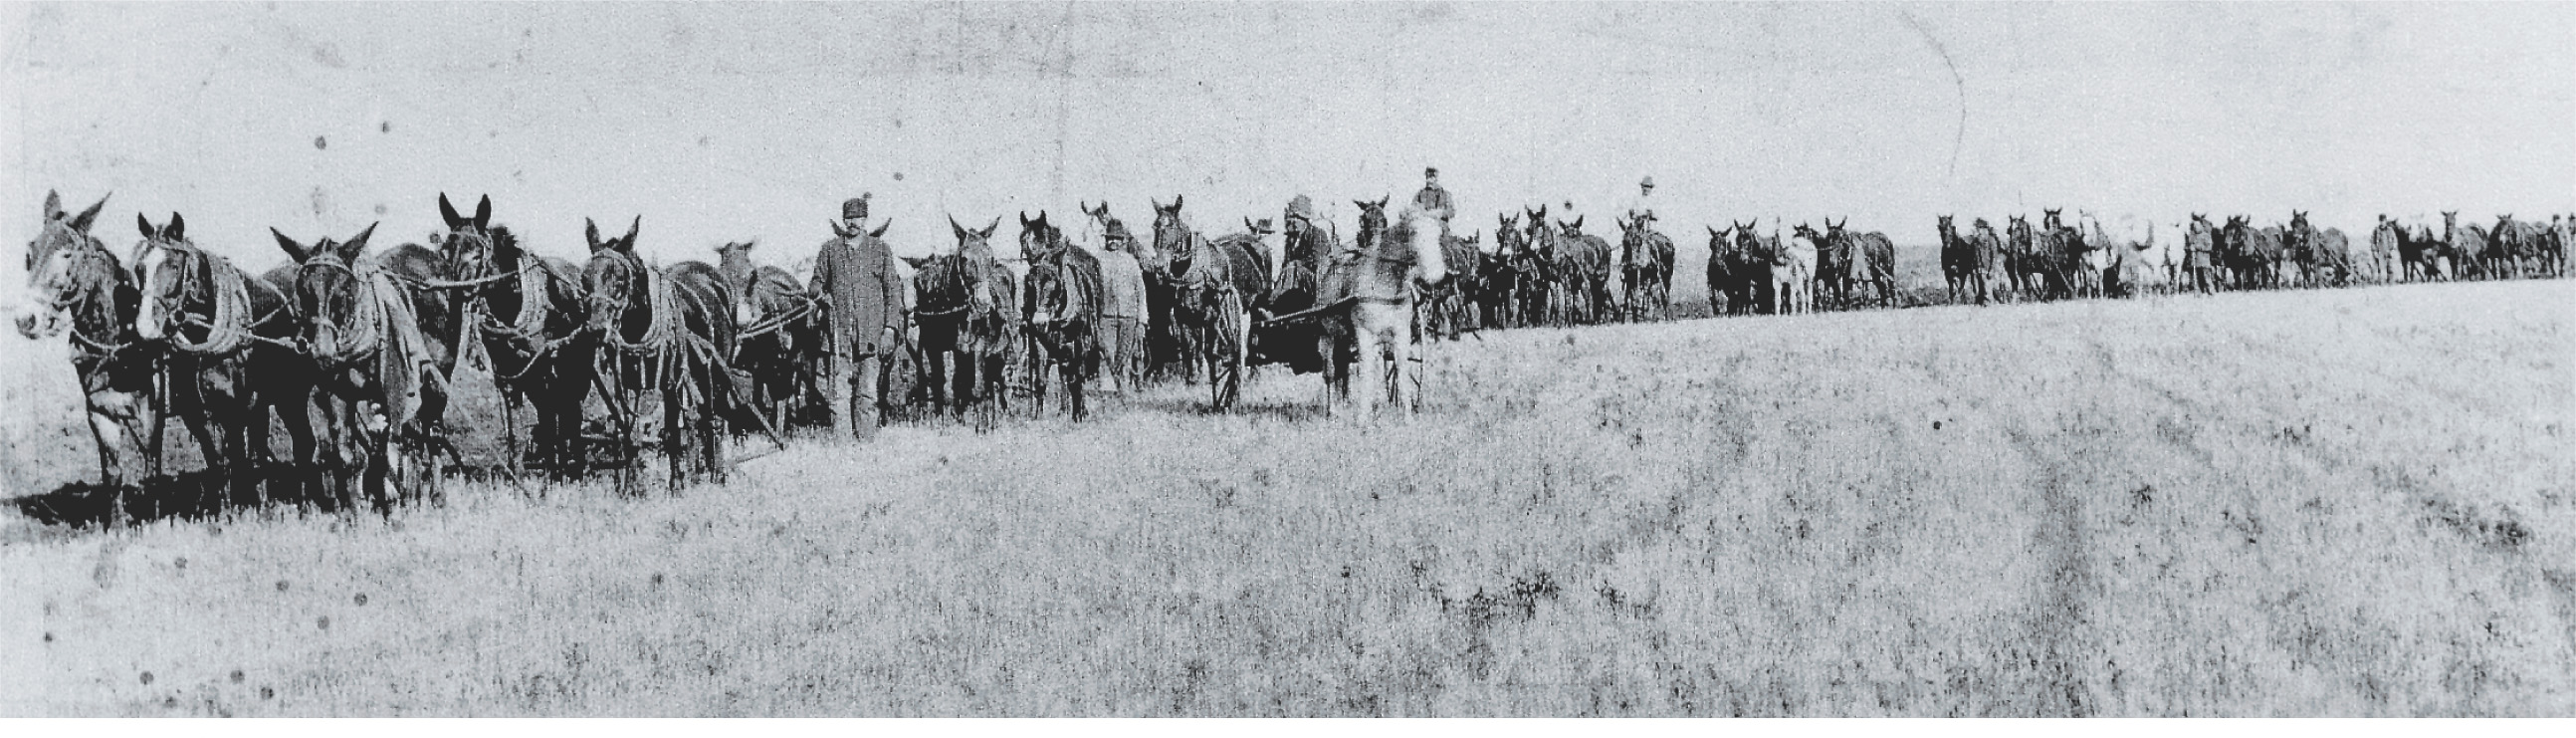 A photo: dozens of horse-teams in harnesses form a line in a field.